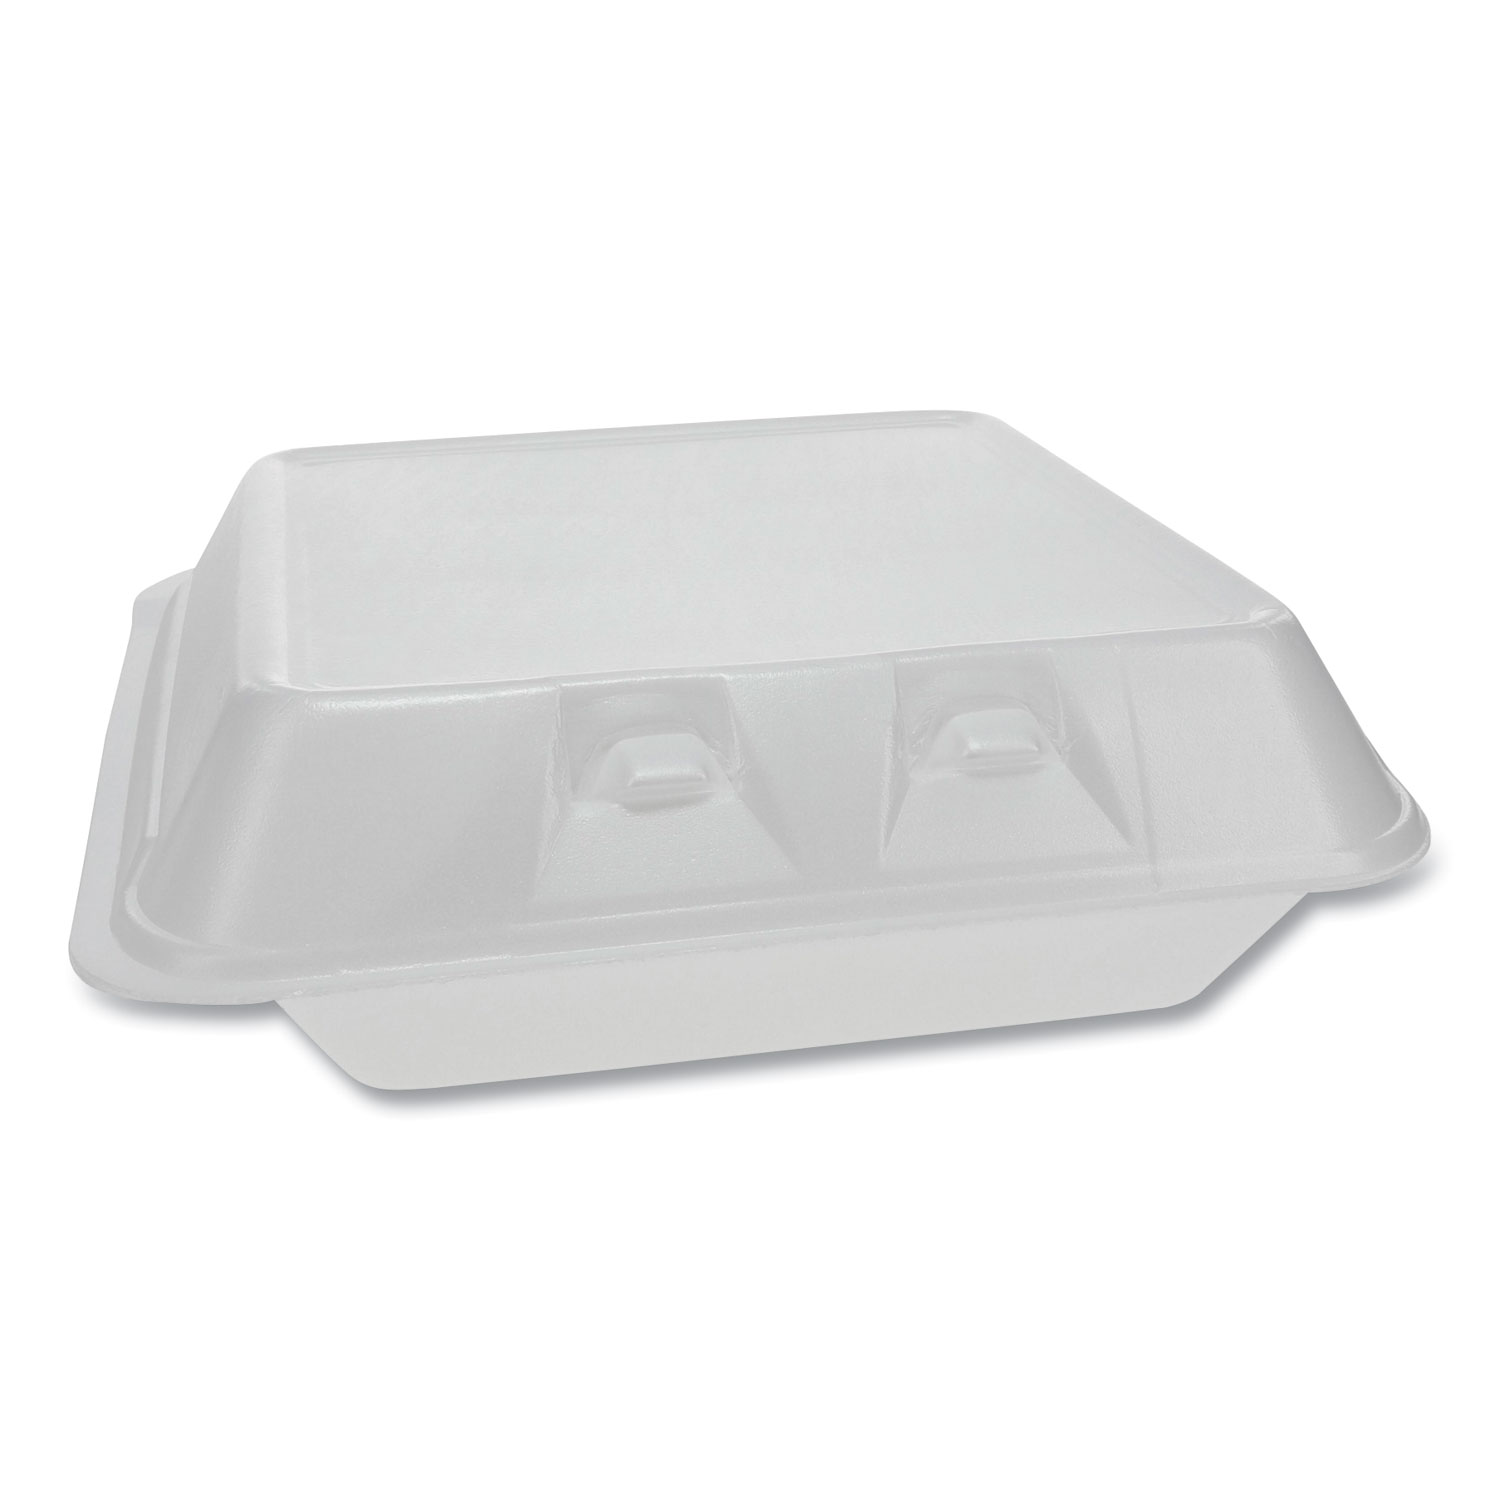  Pactiv YHLW09030000 SmartLock Foam Hinged Containers, Large, 9 x 9.25 x 3.25, 3-Compartment, White, 150/Carton (PCTYHLW09030000) 